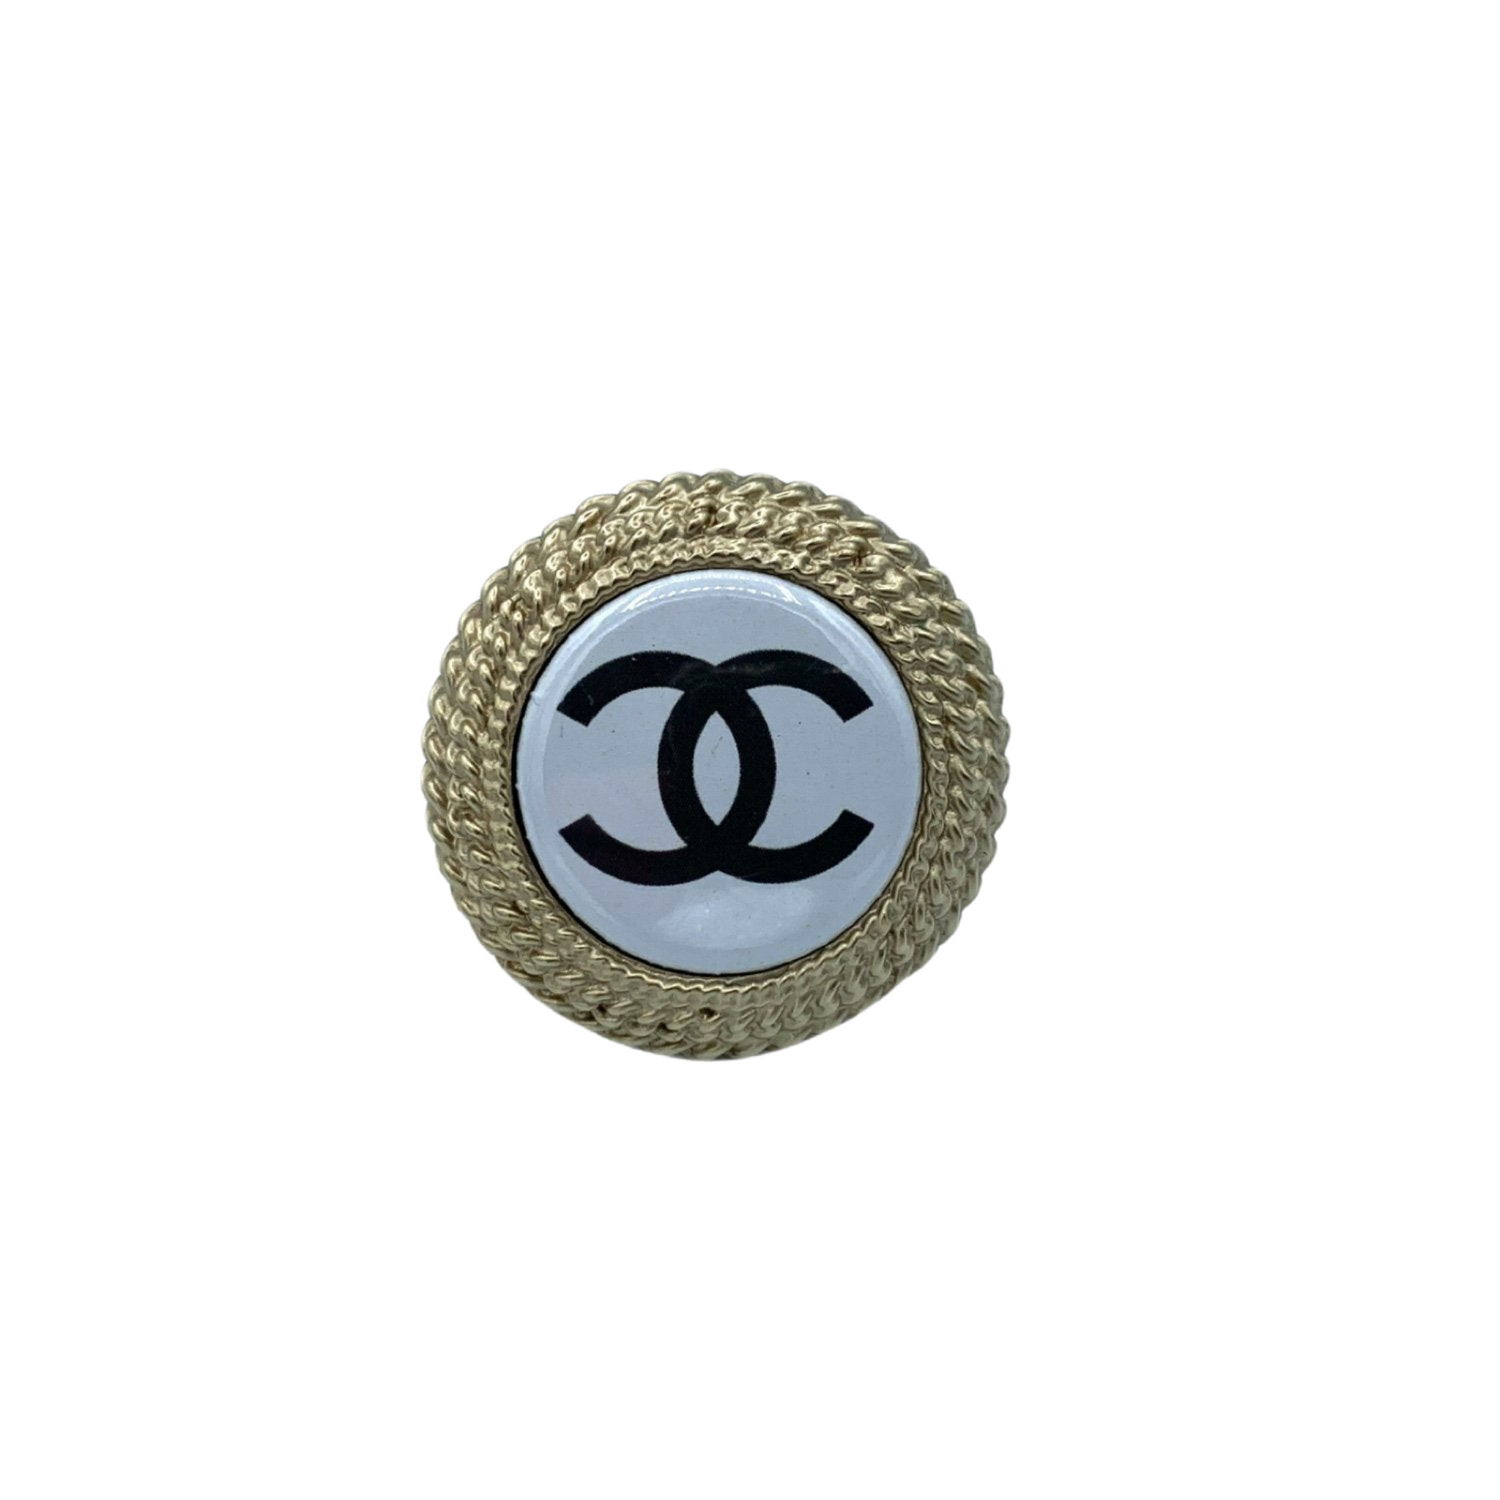 Chanel CC ring - T51 - 2010s